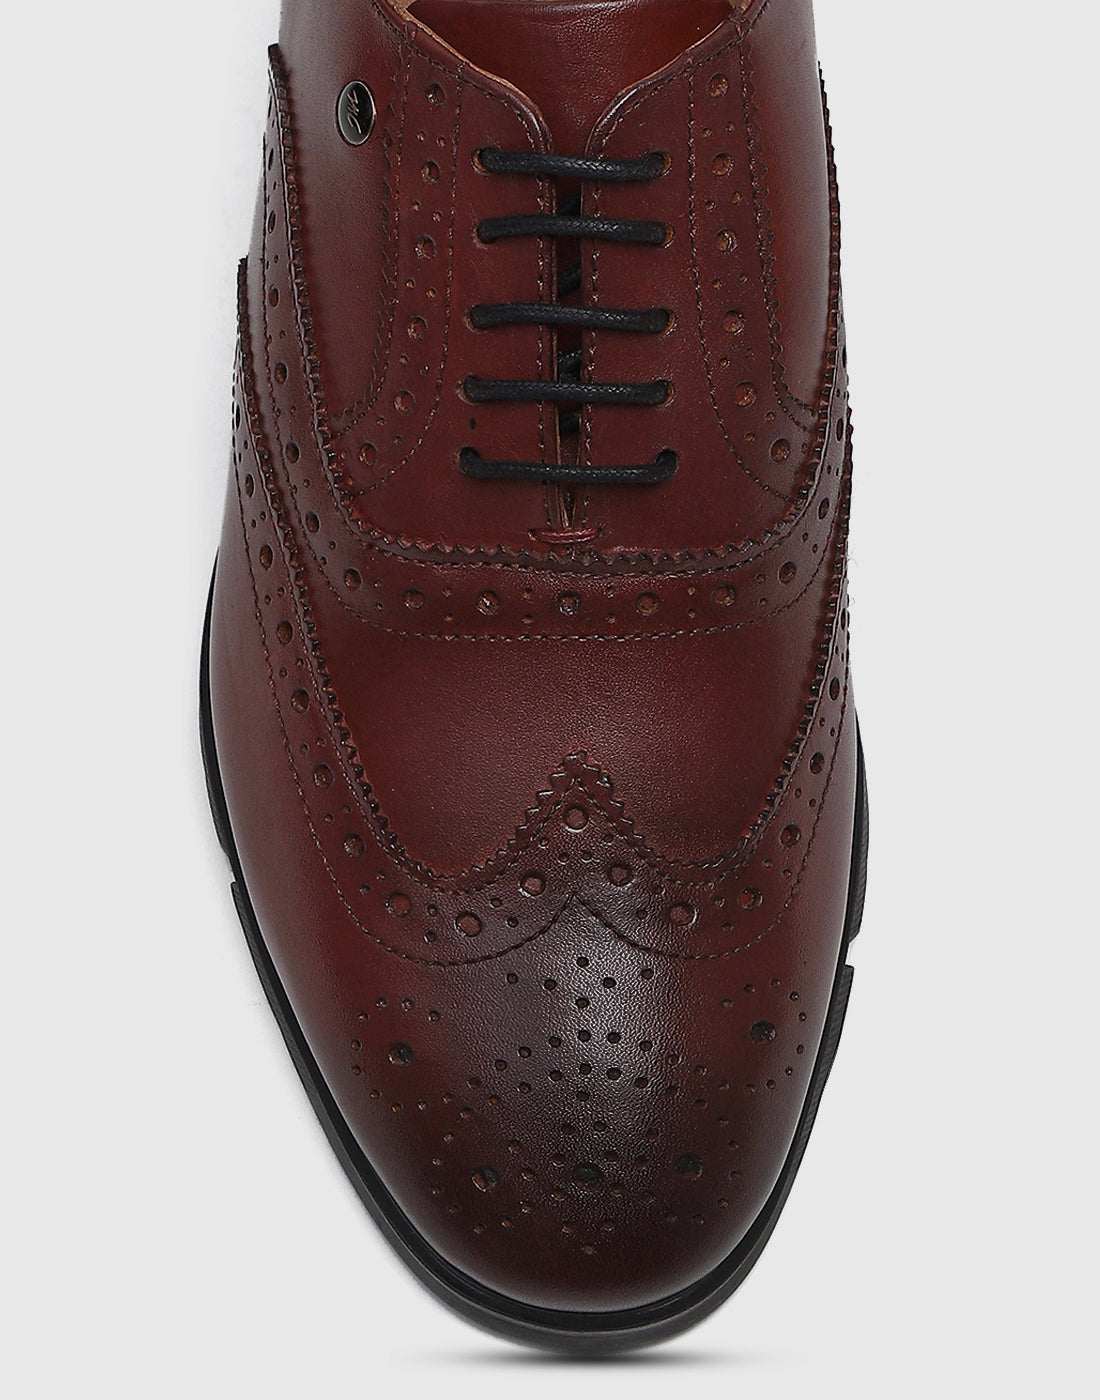 Men Burgundy Lace Up Genuine Leather Formal Brogues